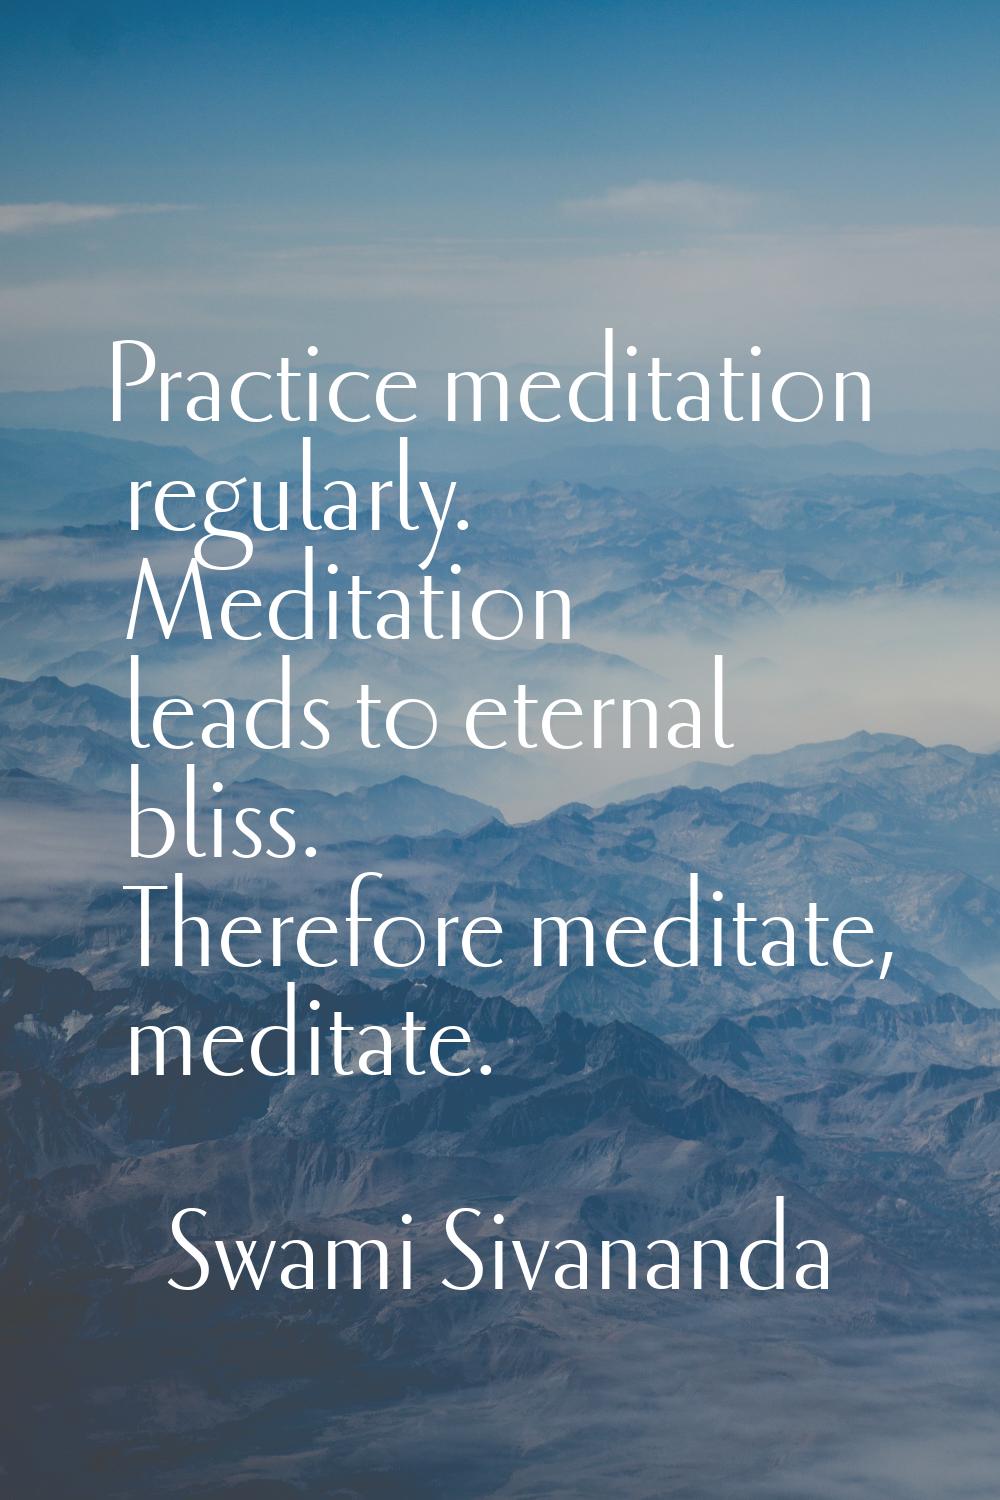 Practice meditation regularly. Meditation leads to eternal bliss. Therefore meditate, meditate.